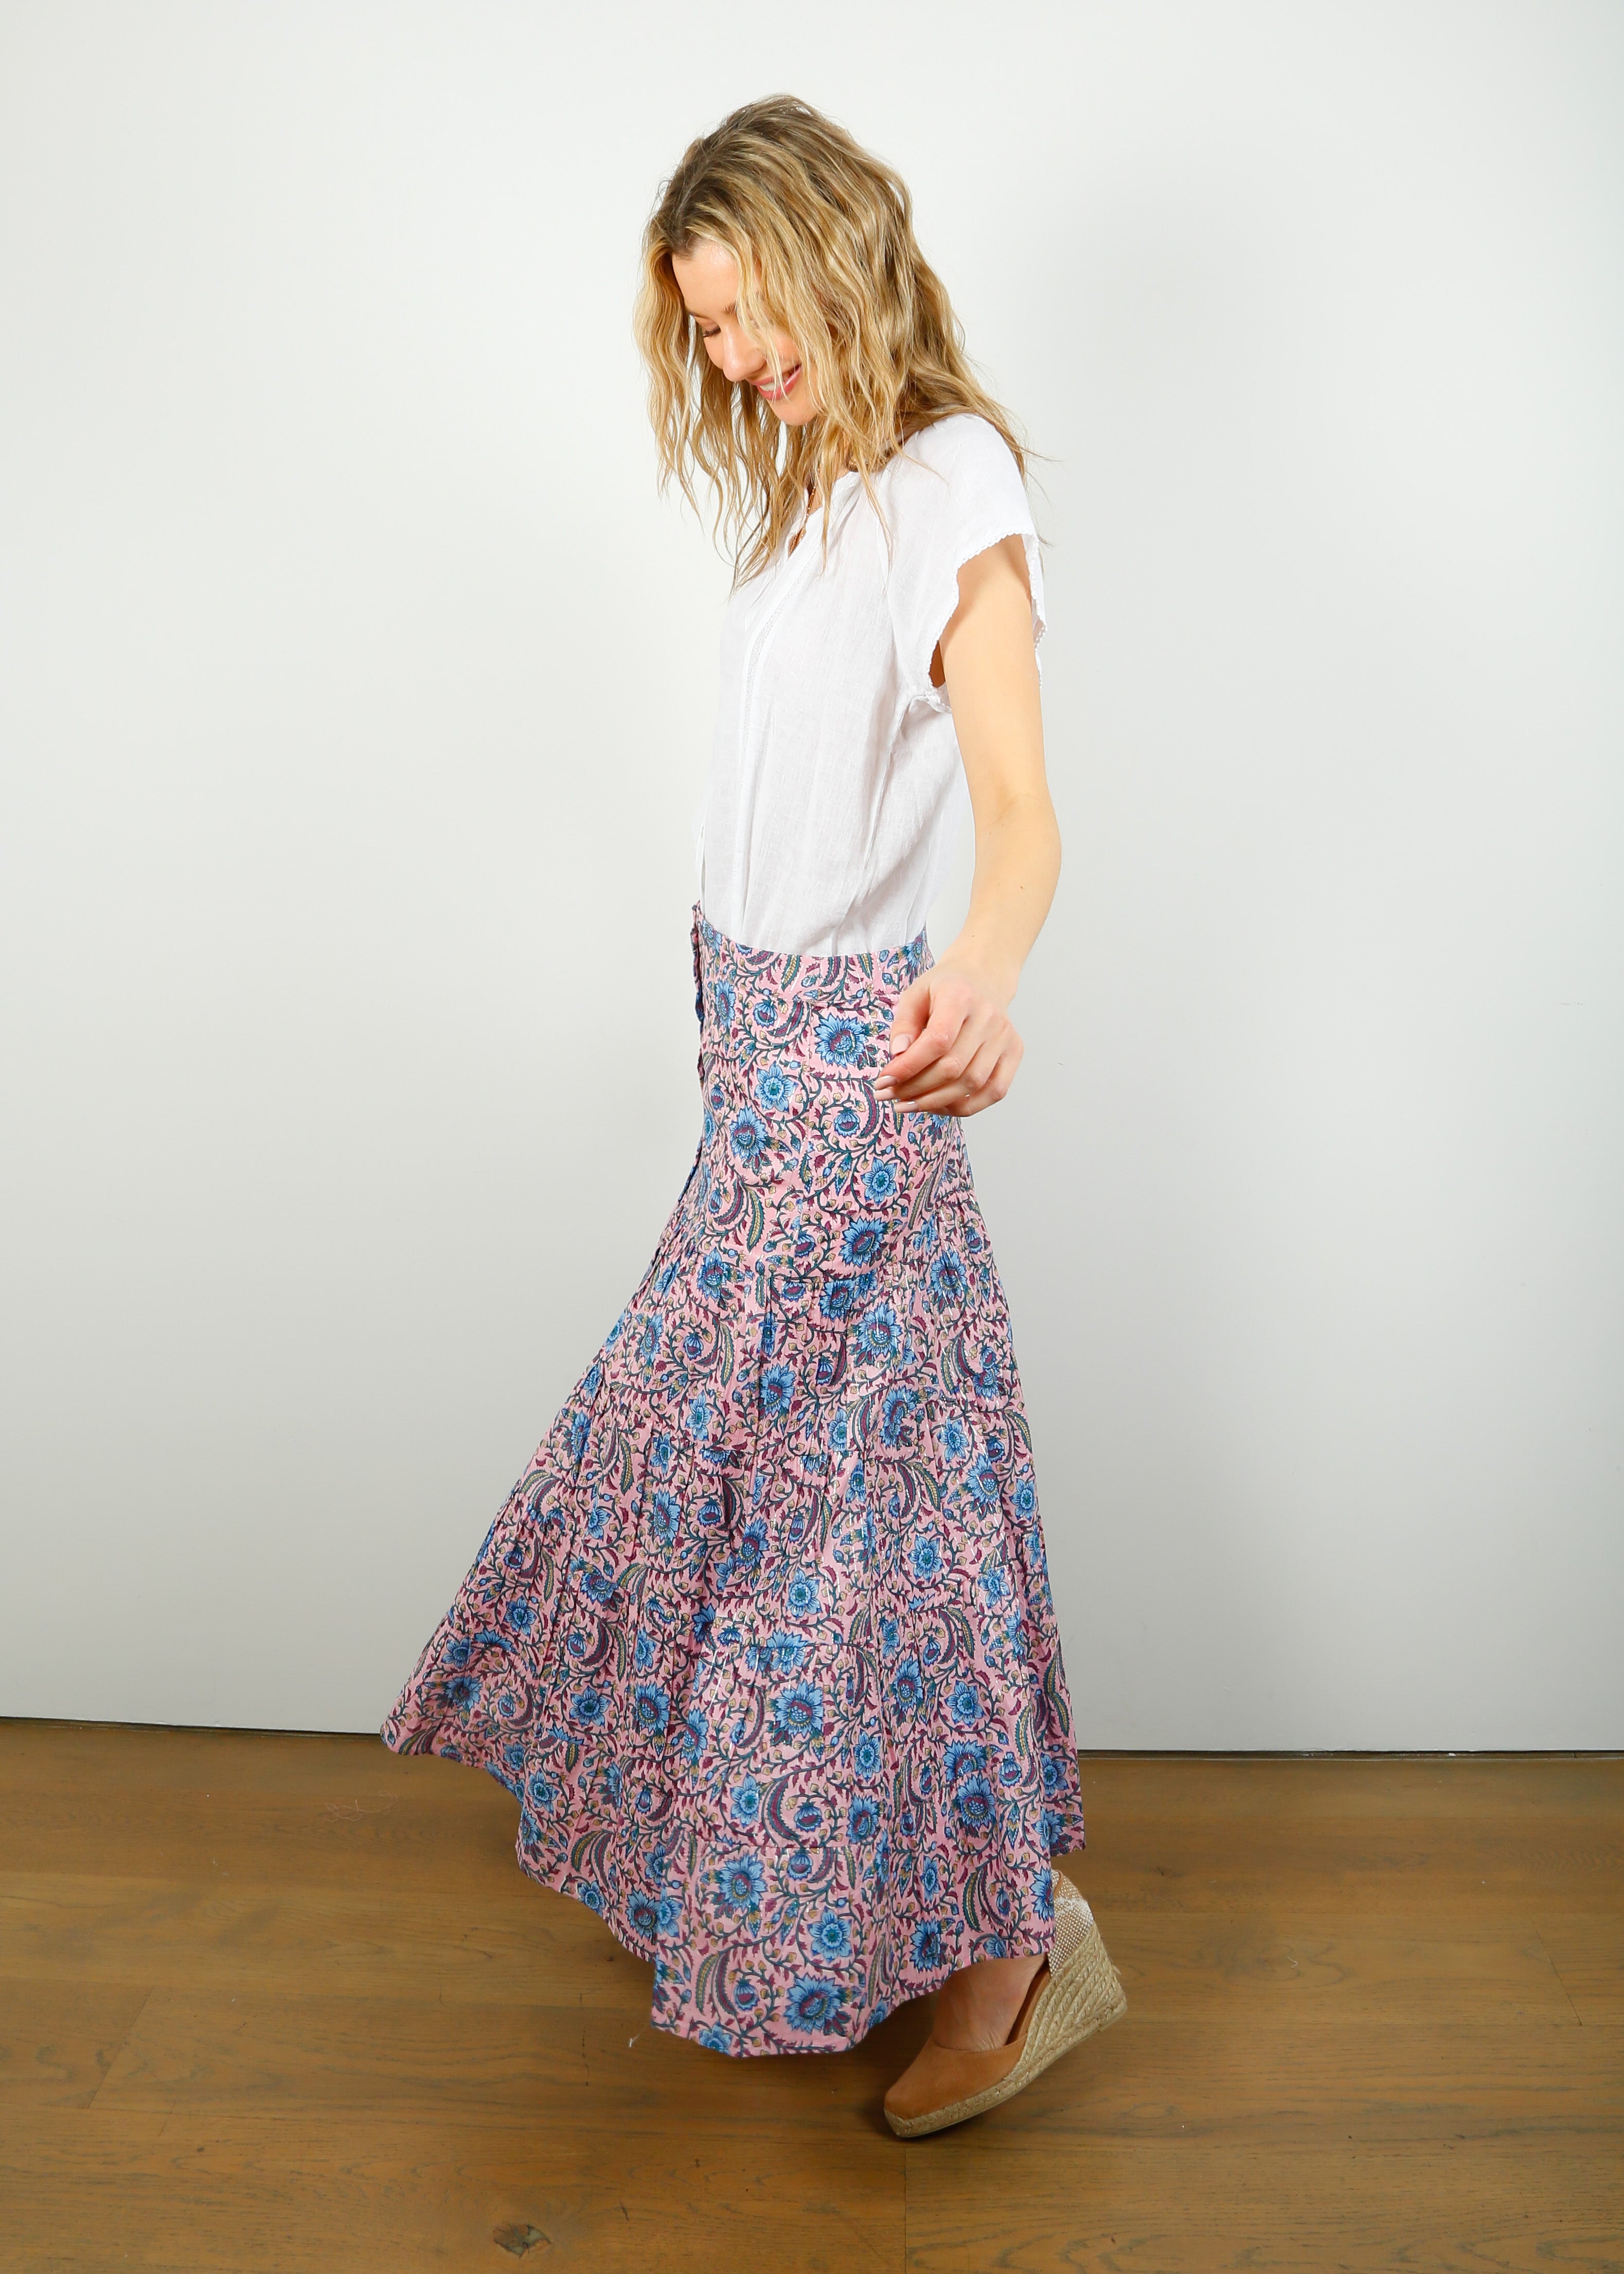 N&N Maddison Skirt in Orchid Chintz